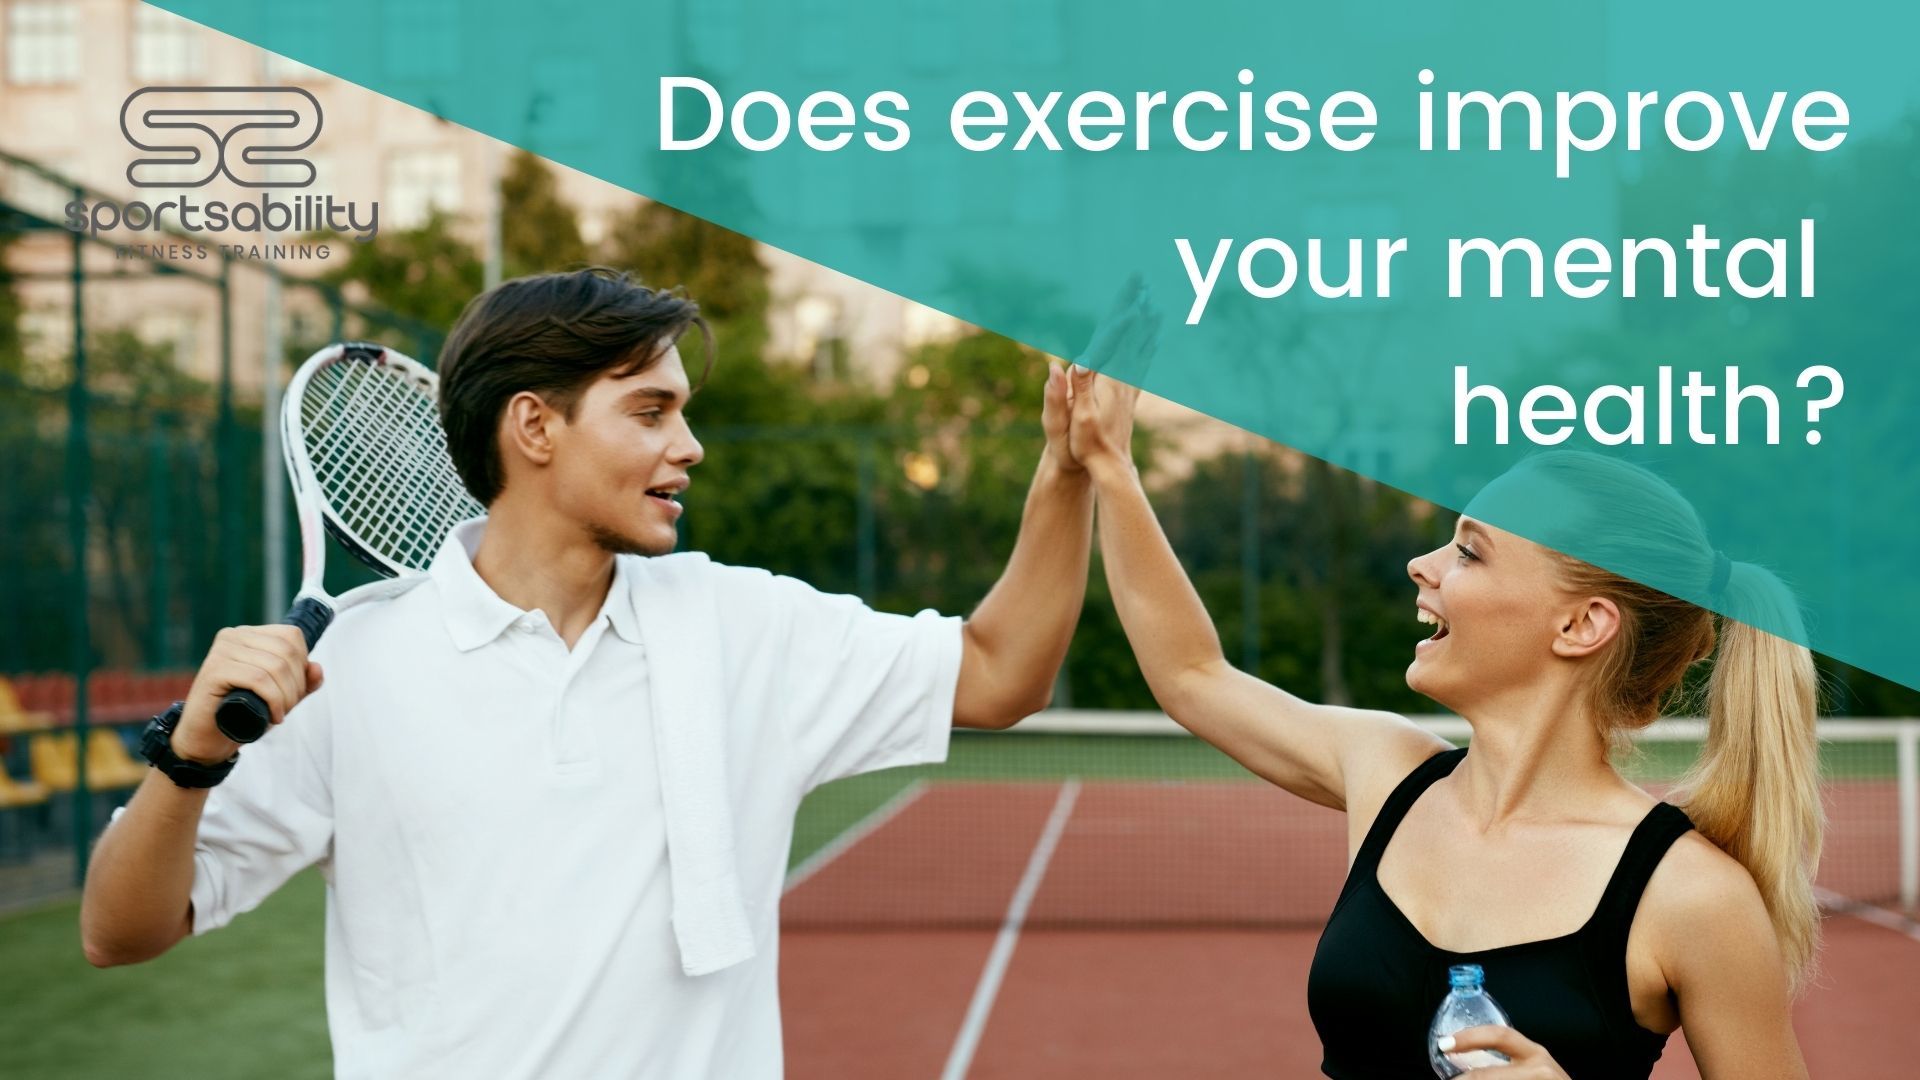 Does exercise improve your mental health?